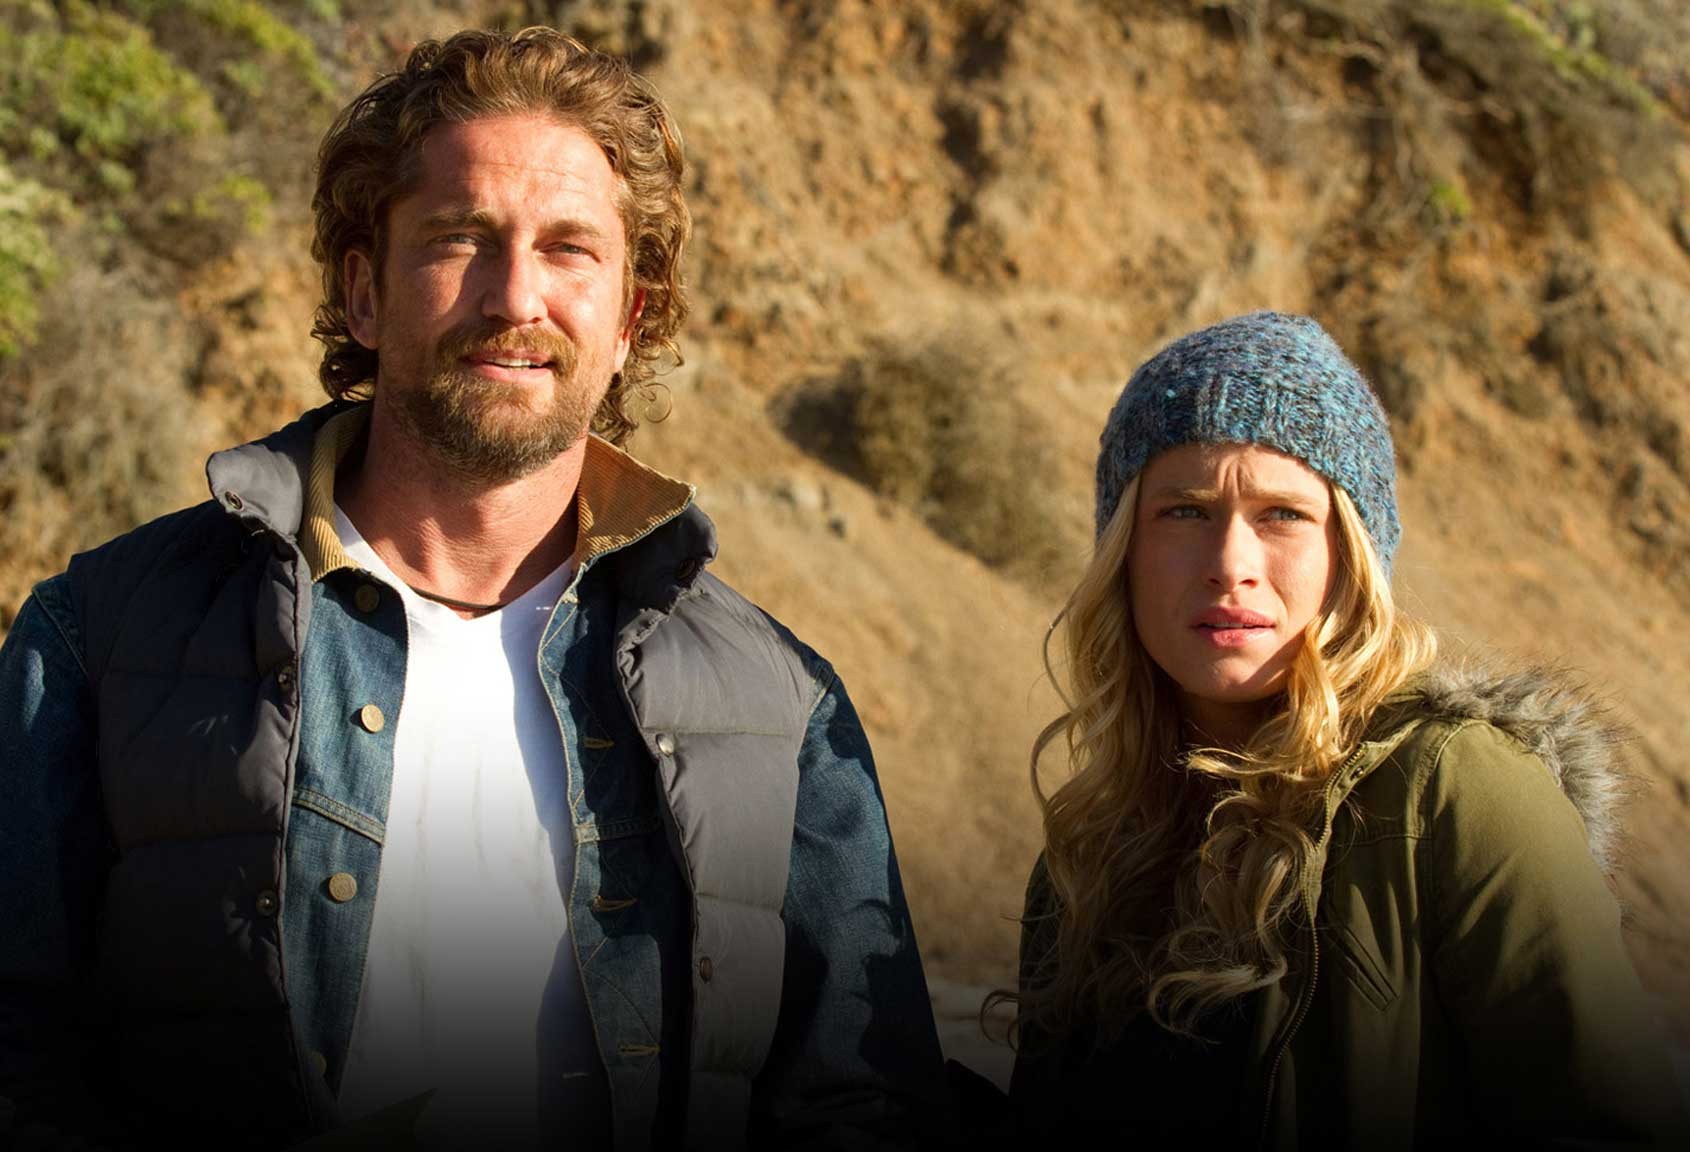 Gerard Butler stars as Frosty Hesson and Leven Rambin stars as Kim in 20th Century Fox's Chasing Mavericks (2012)